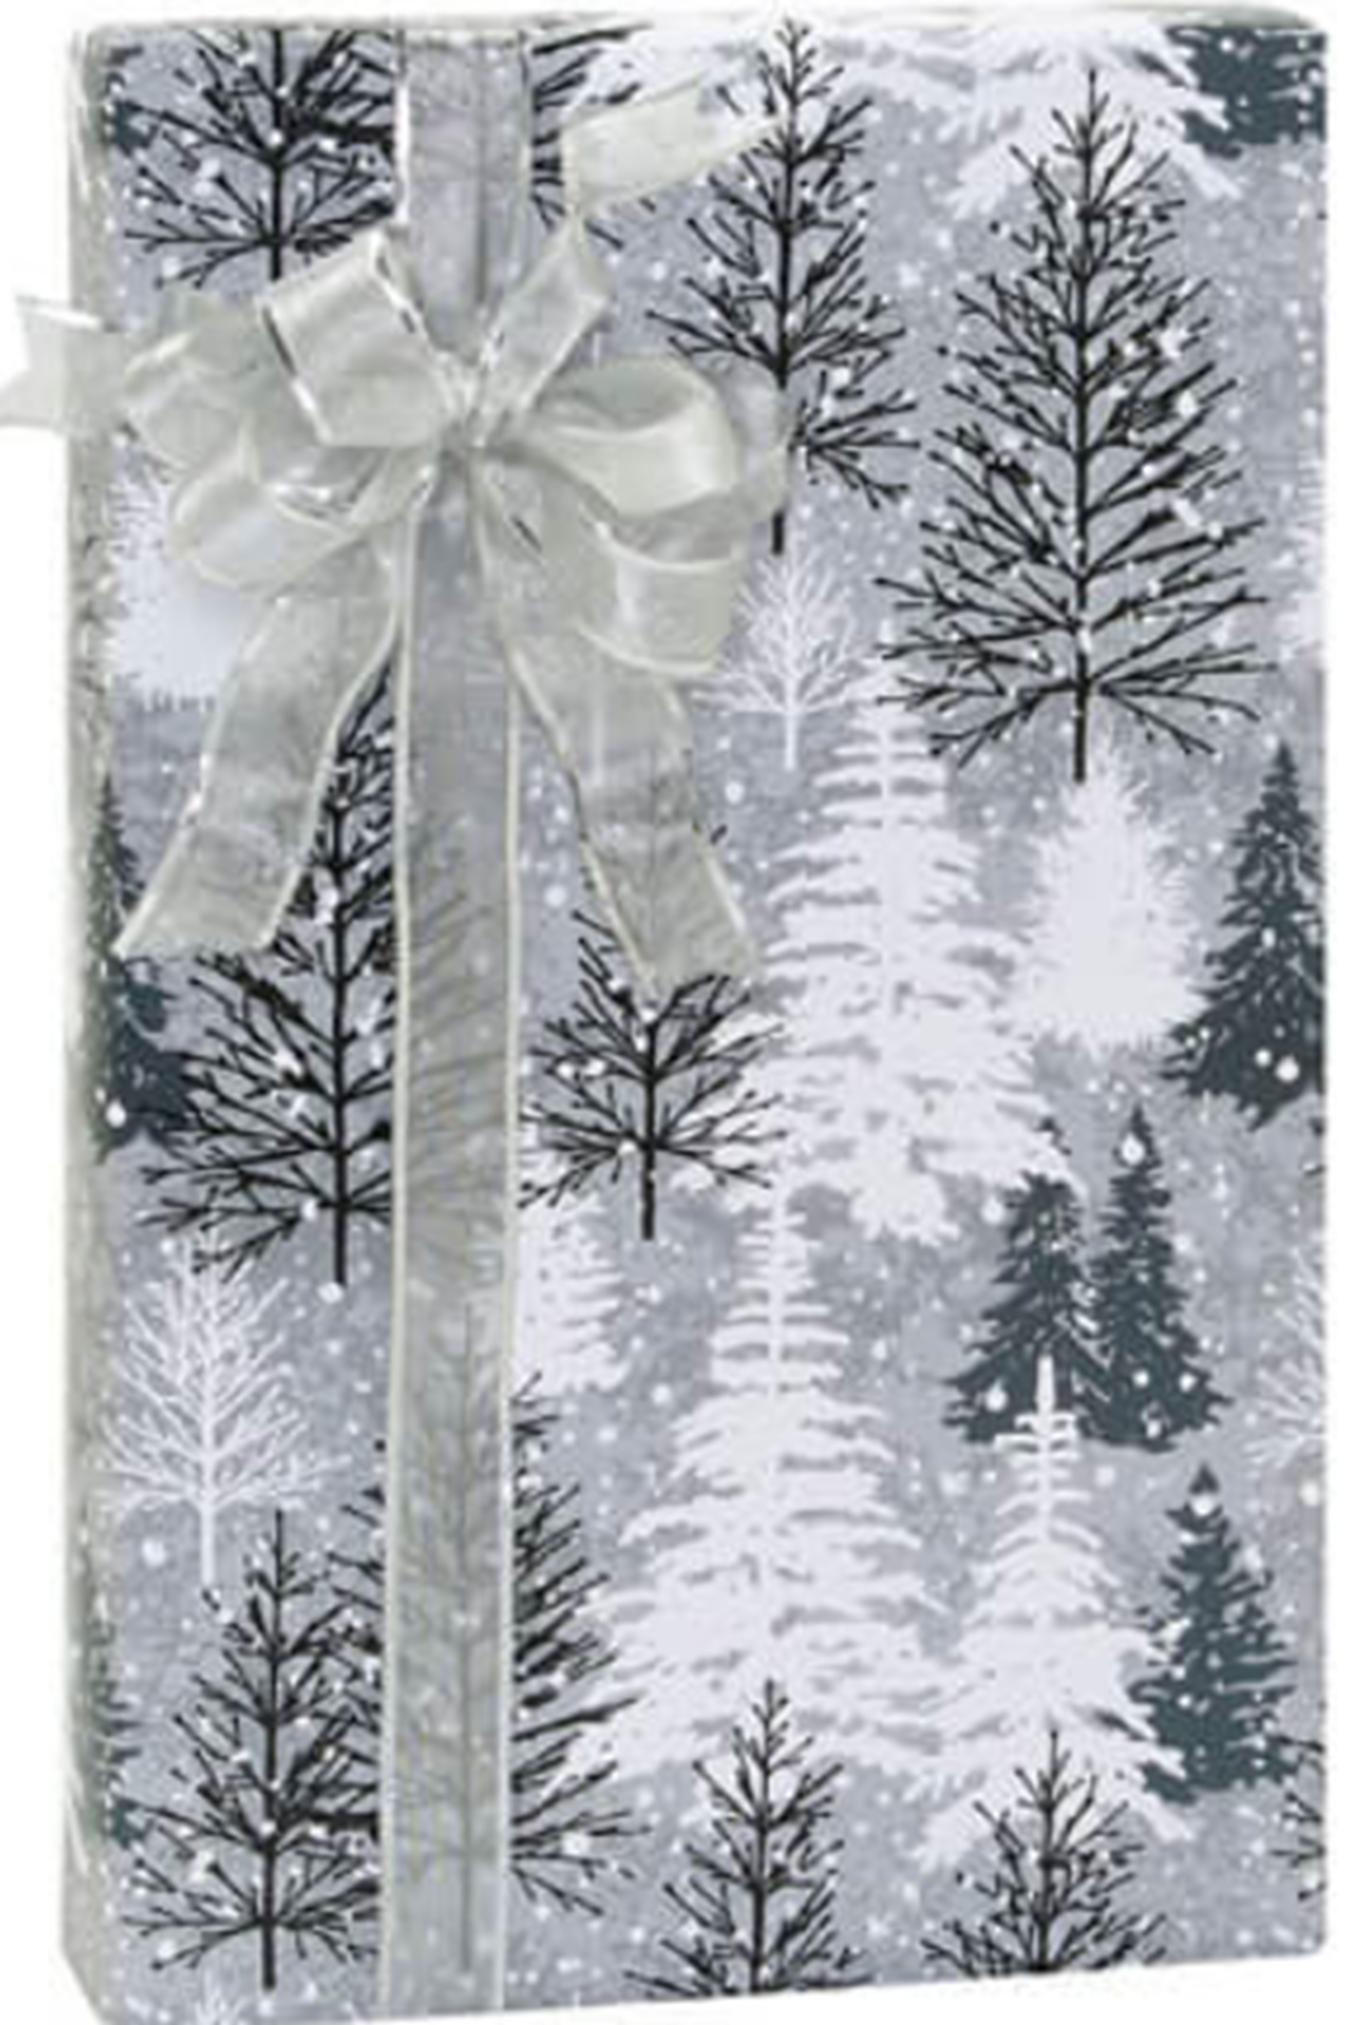 Pretty Metallic Forest Friends Gift Wrapping Paper 15ft – CakeSupplyShop